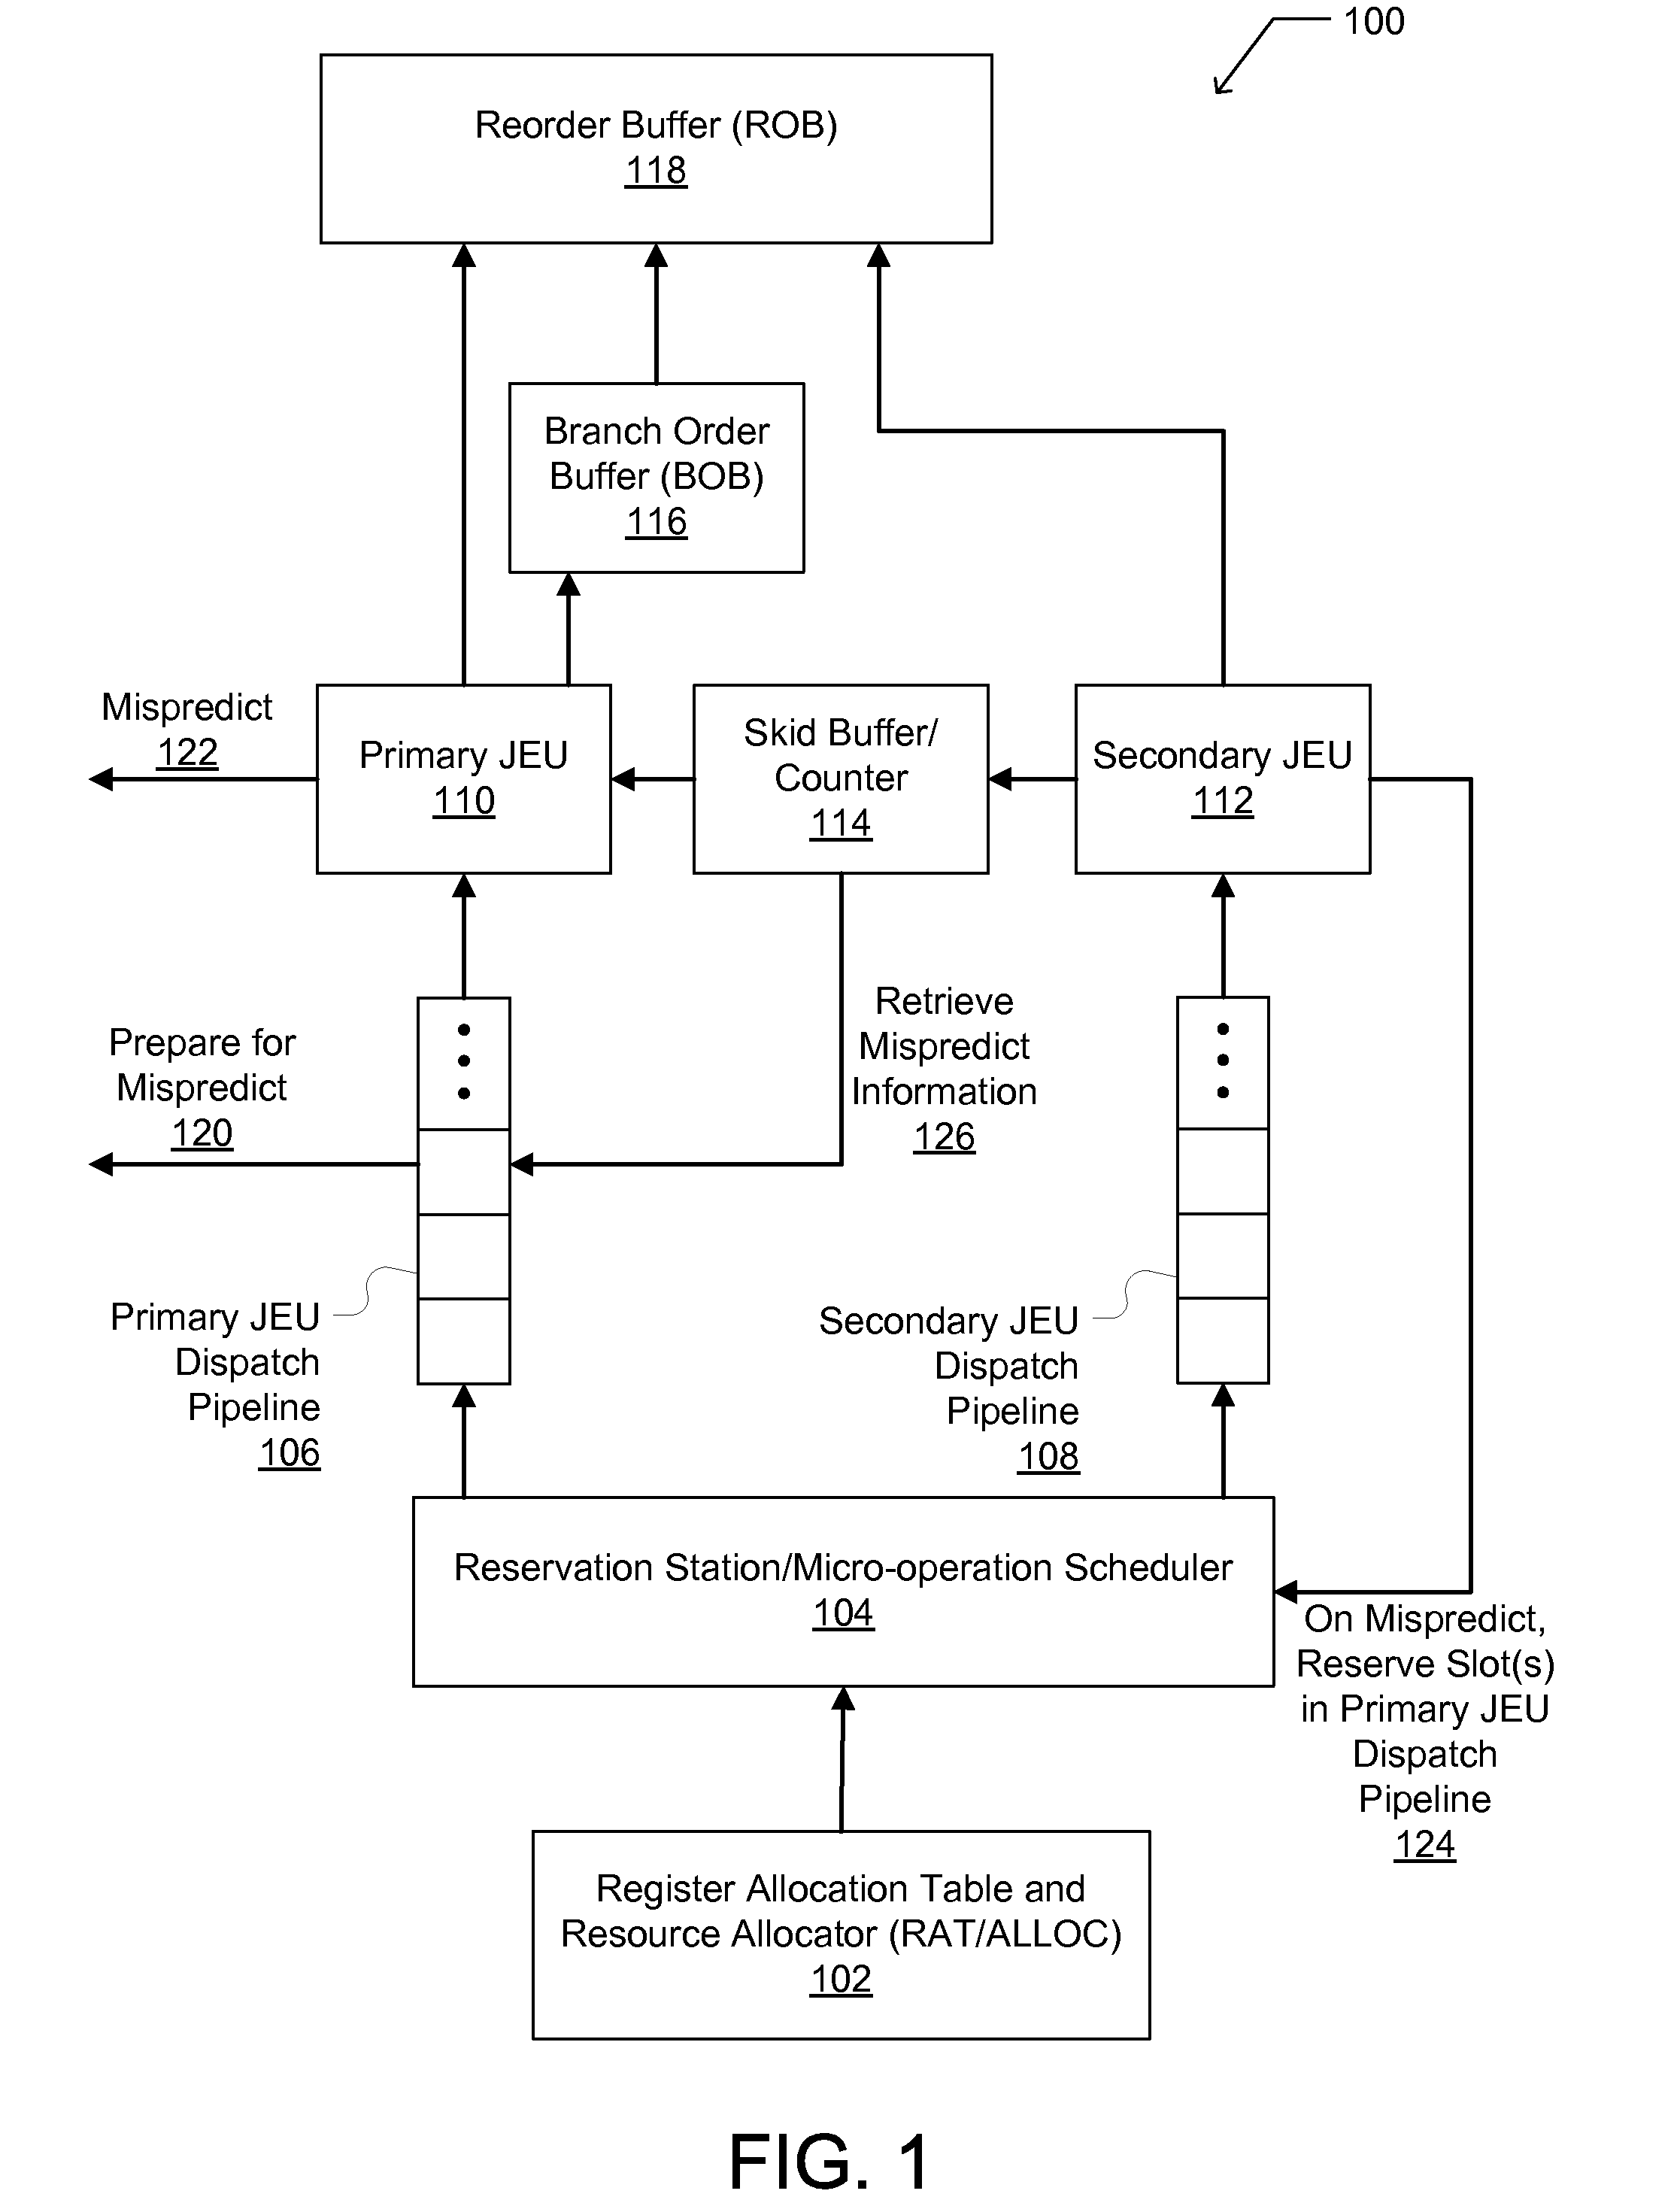 Processor with second jump execution unit for branch misprediction